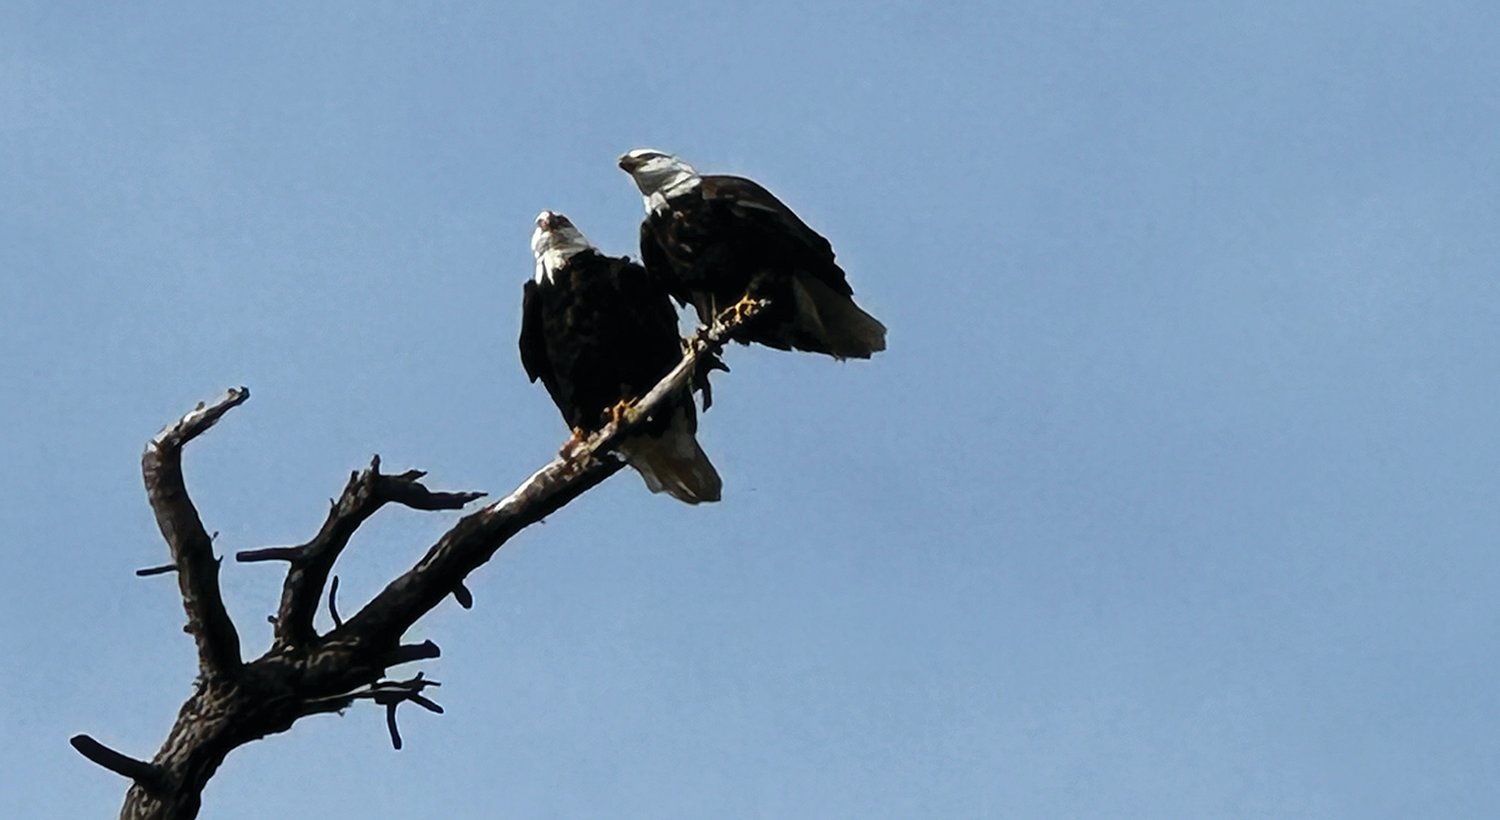  Two bald eagles checking out their hunting prospects at the Seabright development on January 16.